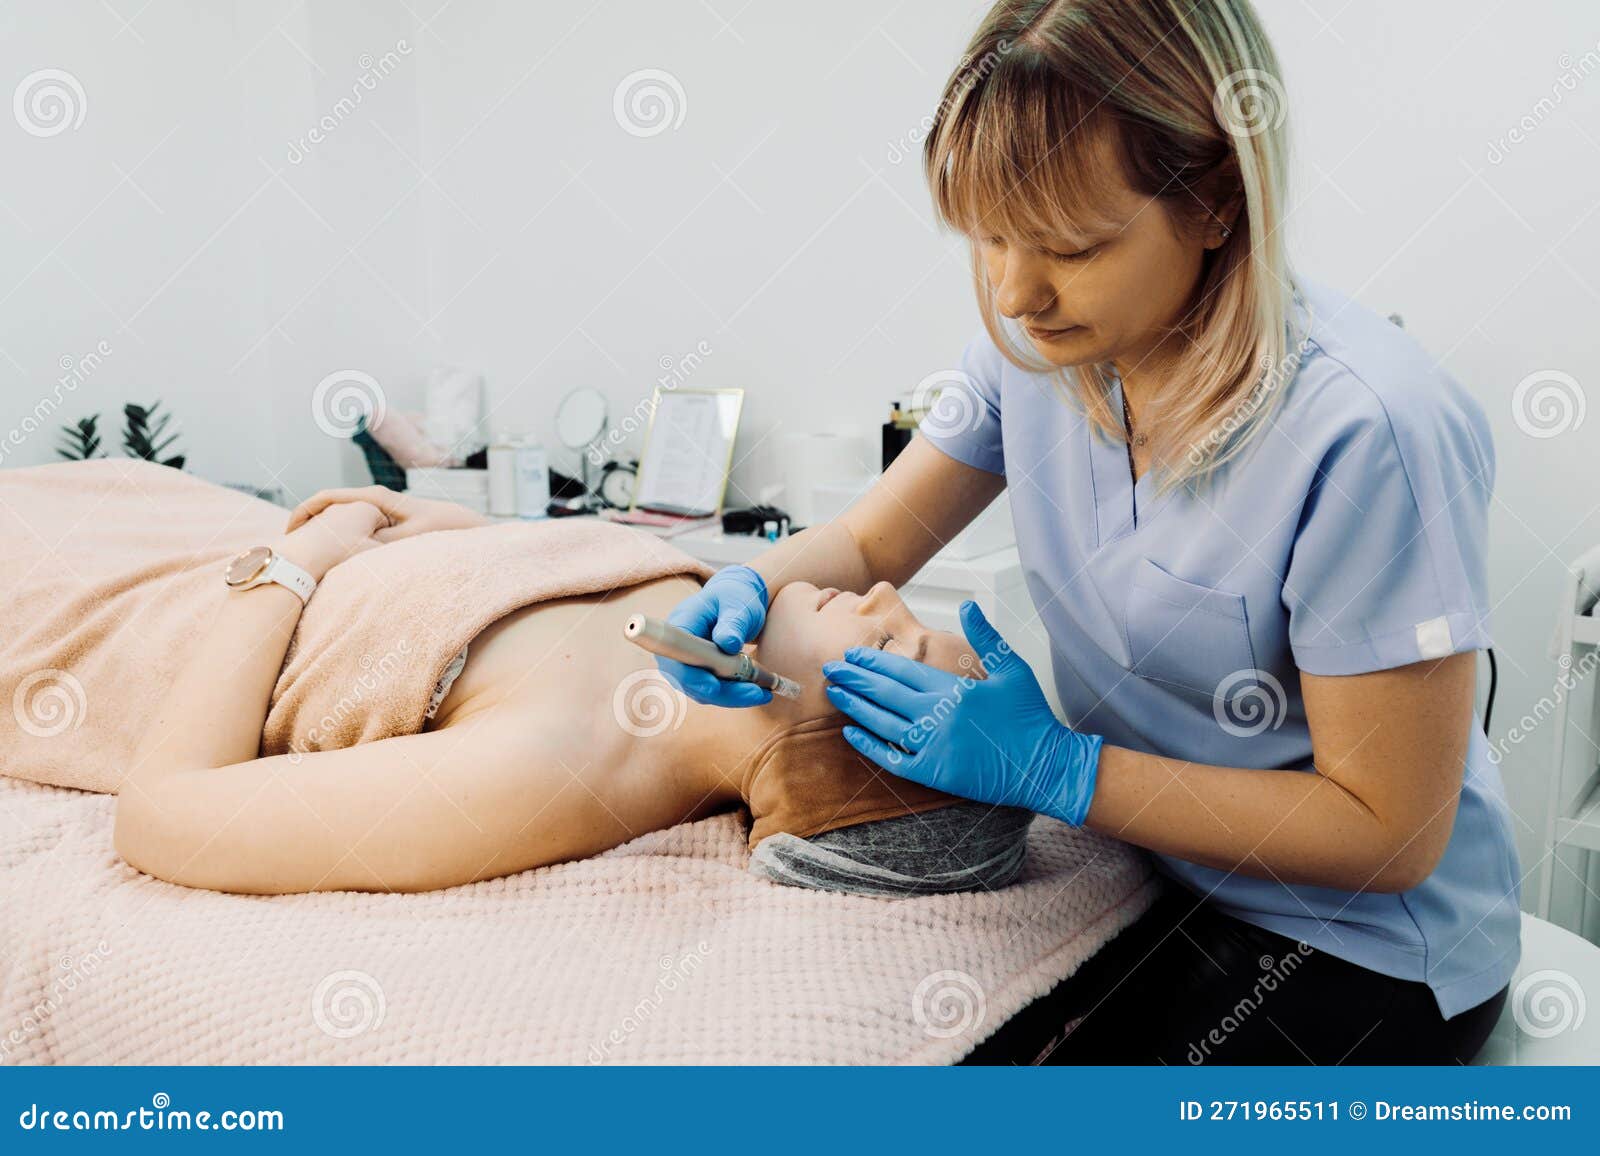 female doctor applying dermapen device for relaxed woman patient, lying on couch in spa clinic on beauty procedures